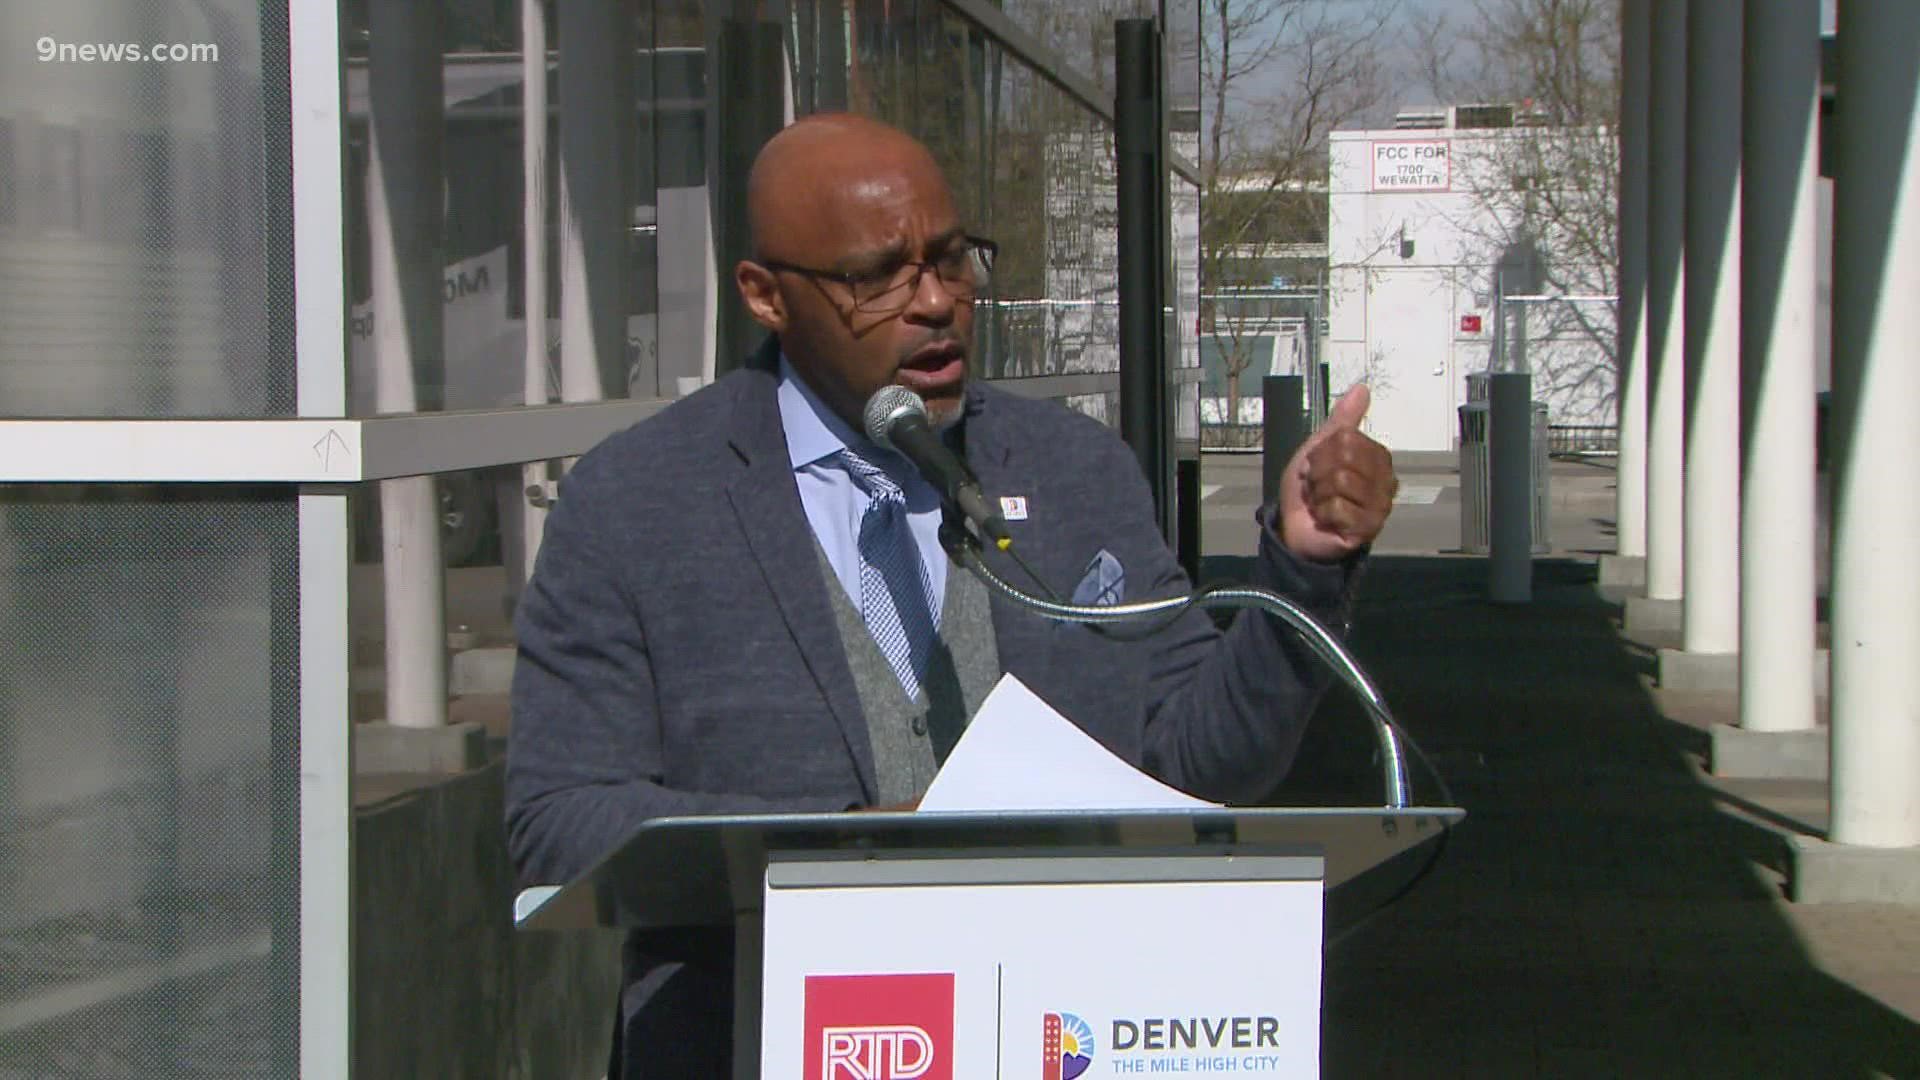 Mayor Hancock said the use and sale of illegal drugs and related violence need to be addressed, and that issues were not driven by homelessness.